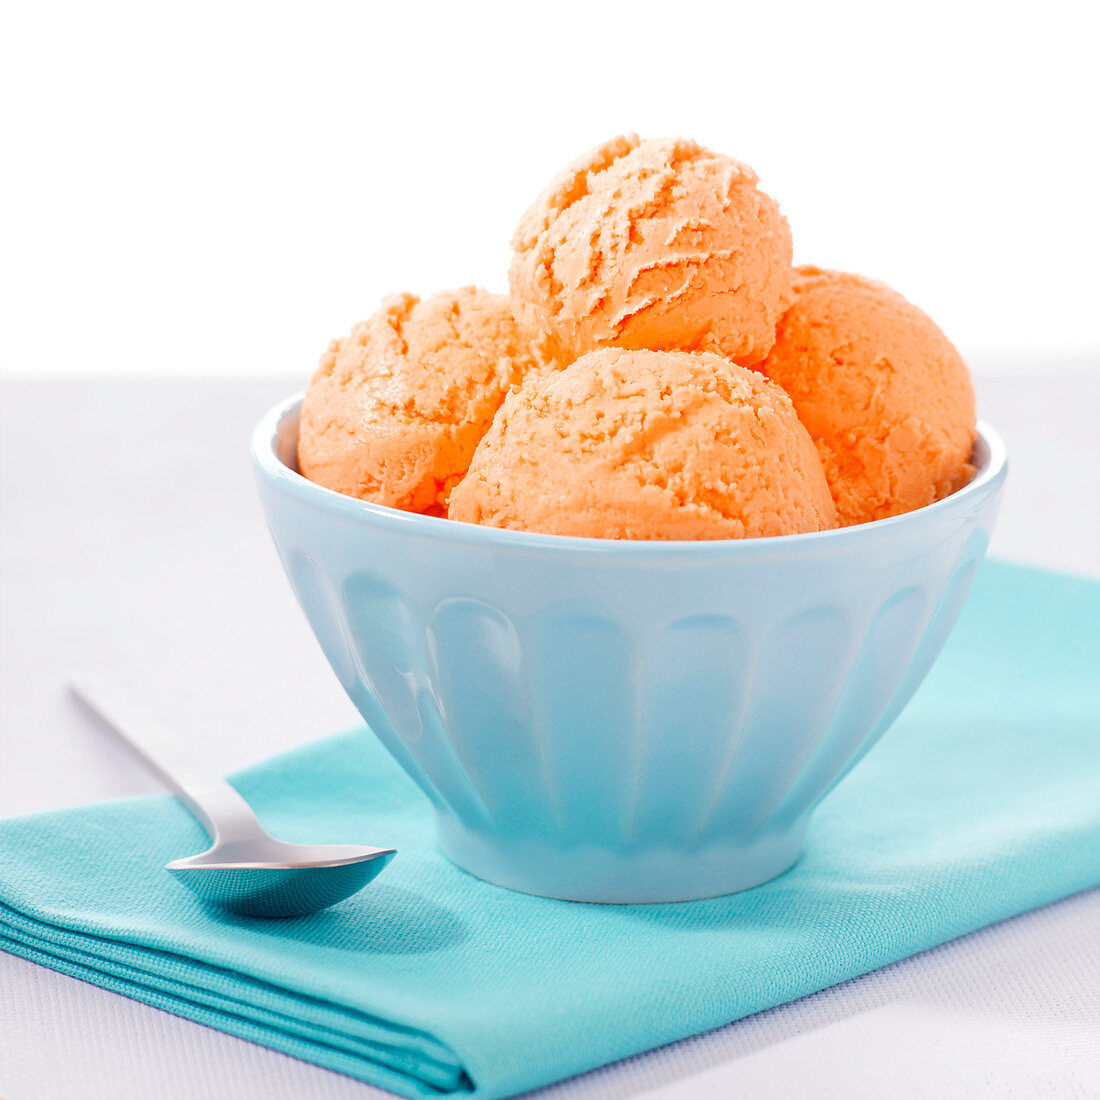 Close-up of 4 scoops of orange colored ice cream in blue bowl